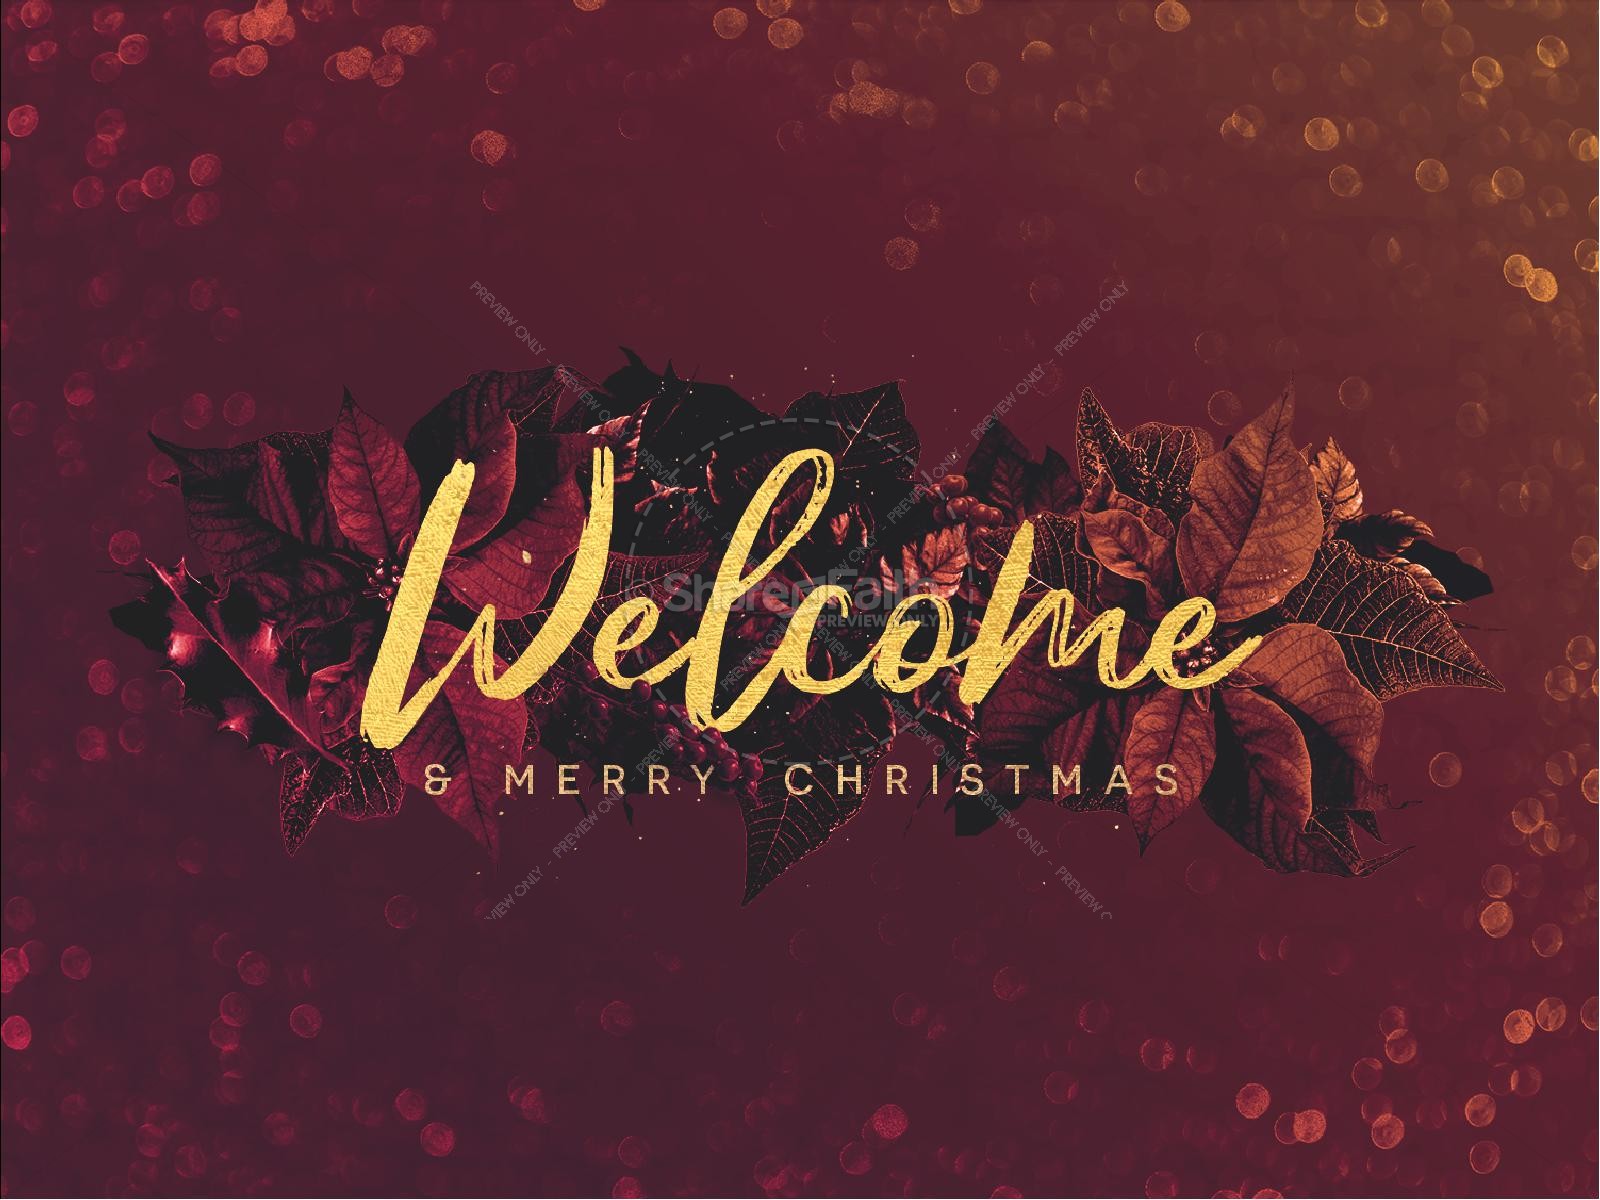 Merry Christmas Holly Service Graphic Thumbnail 2